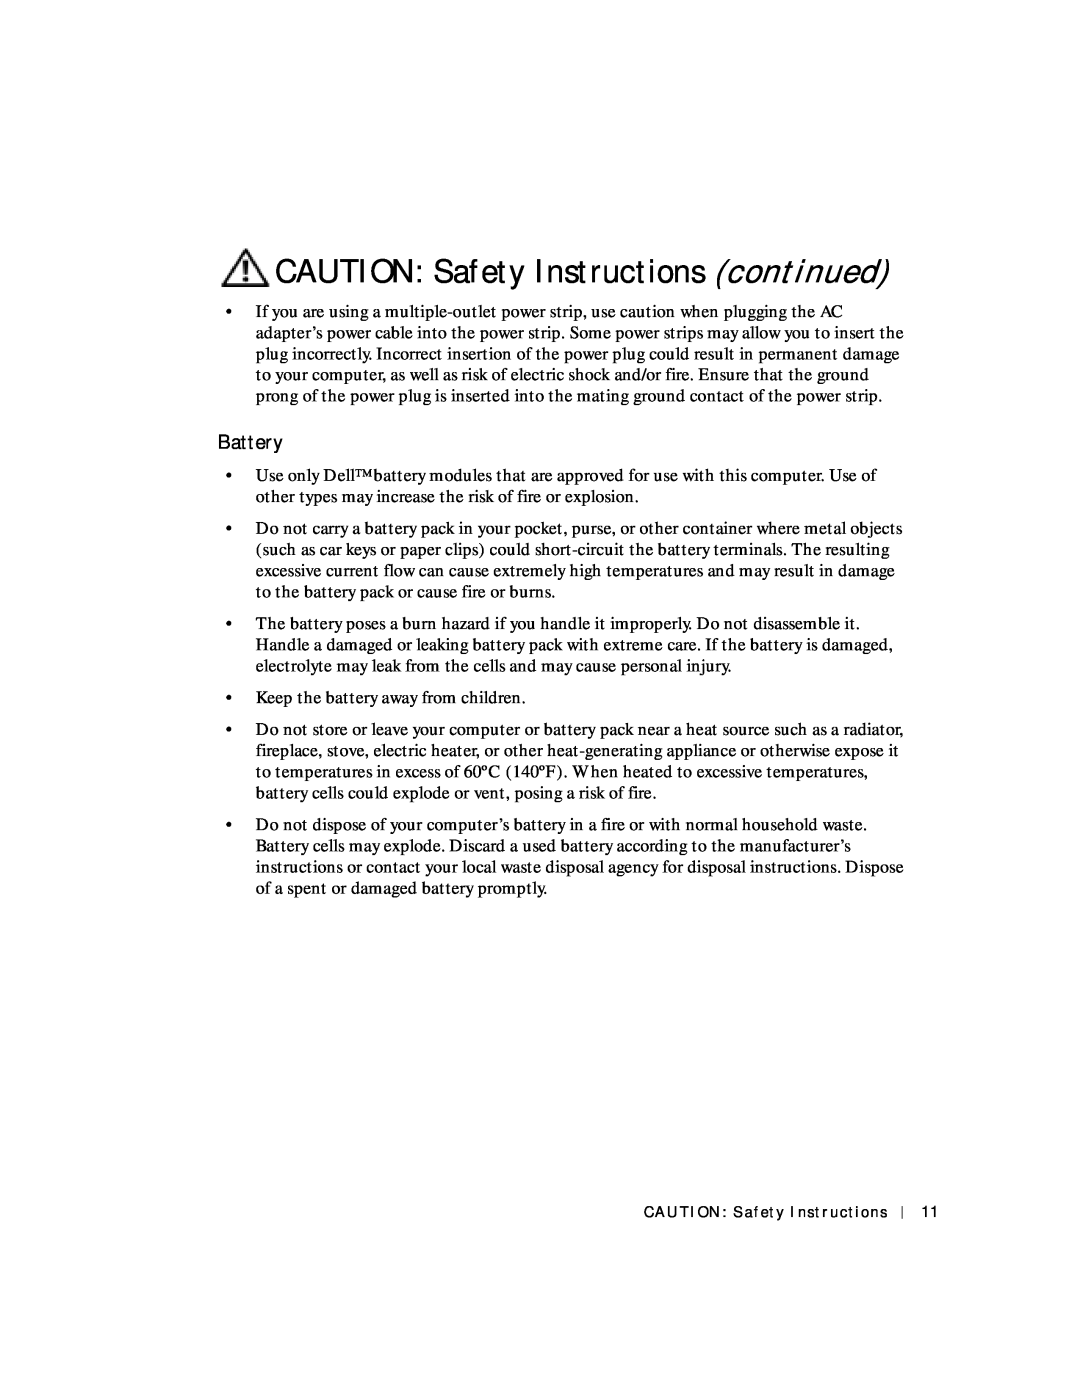 Dell 4150 owner manual Battery, CAUTION Safety Instructions continued 